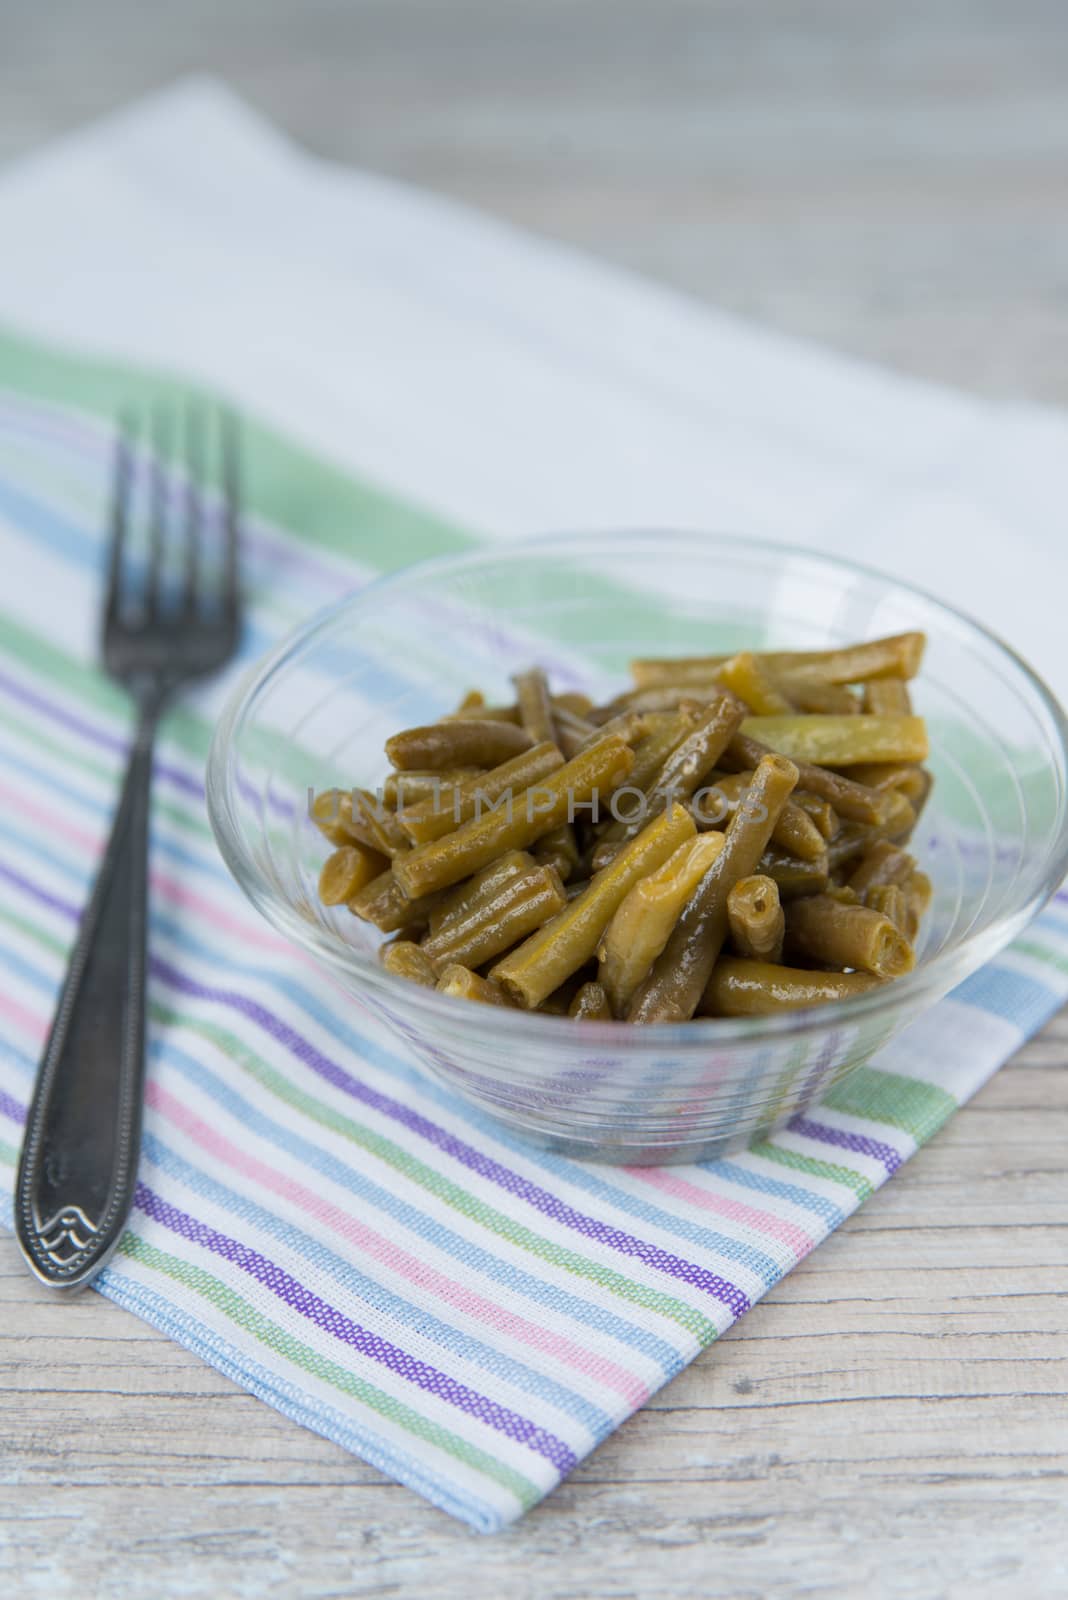 Plate of the prepared green beans and fork on the napkin